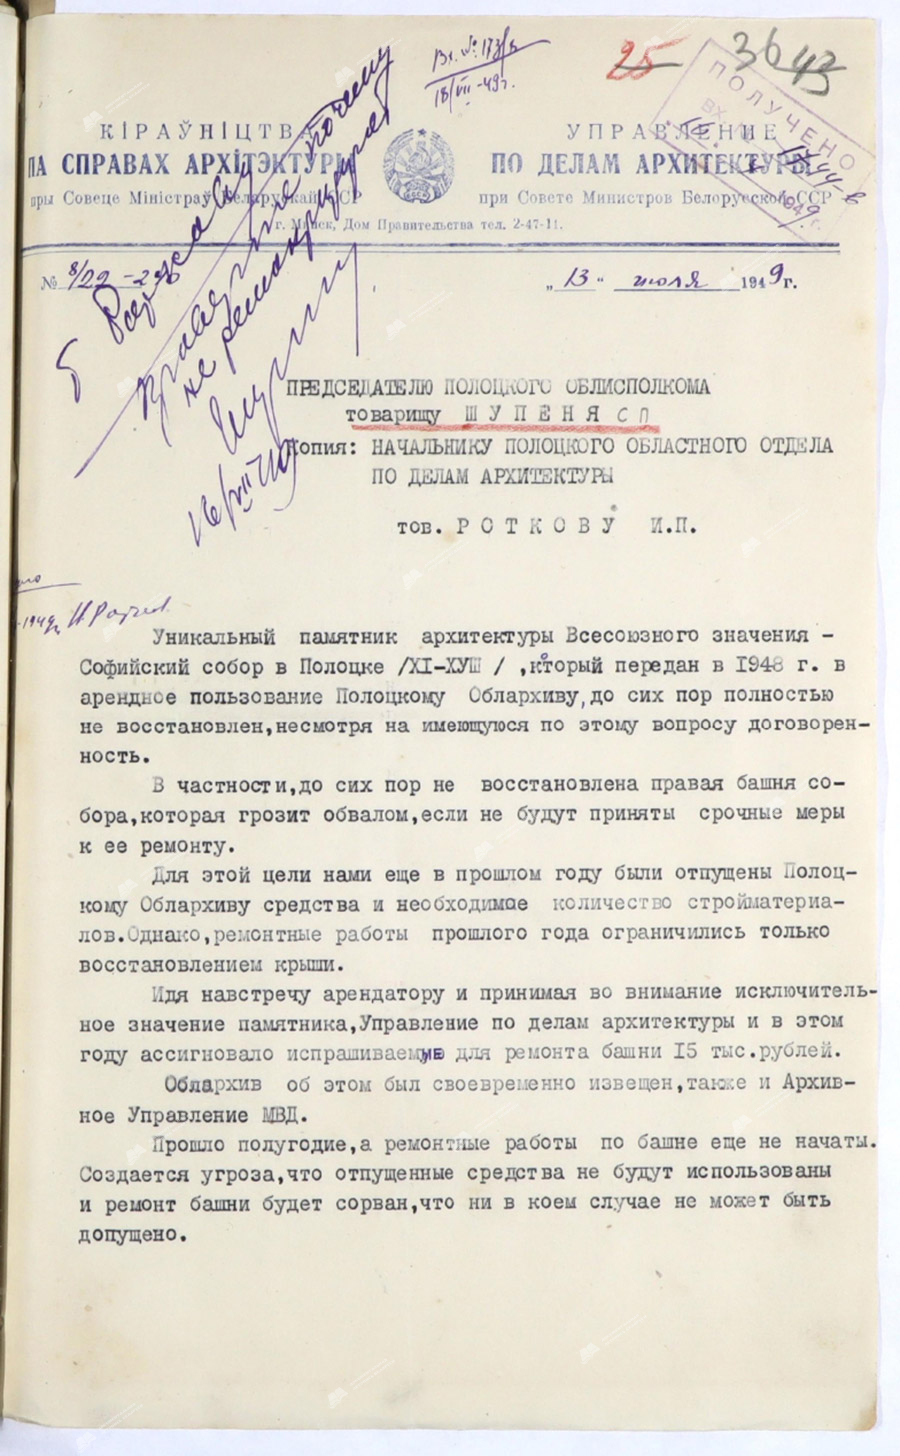 Letter from the deputy. Head of the Directorate for Architectural Affairs under the Council of Ministers of the BSSR on July 13, 1949 on the issue of repairing the St. Sophia Cathedral in Polotsk-с. 0